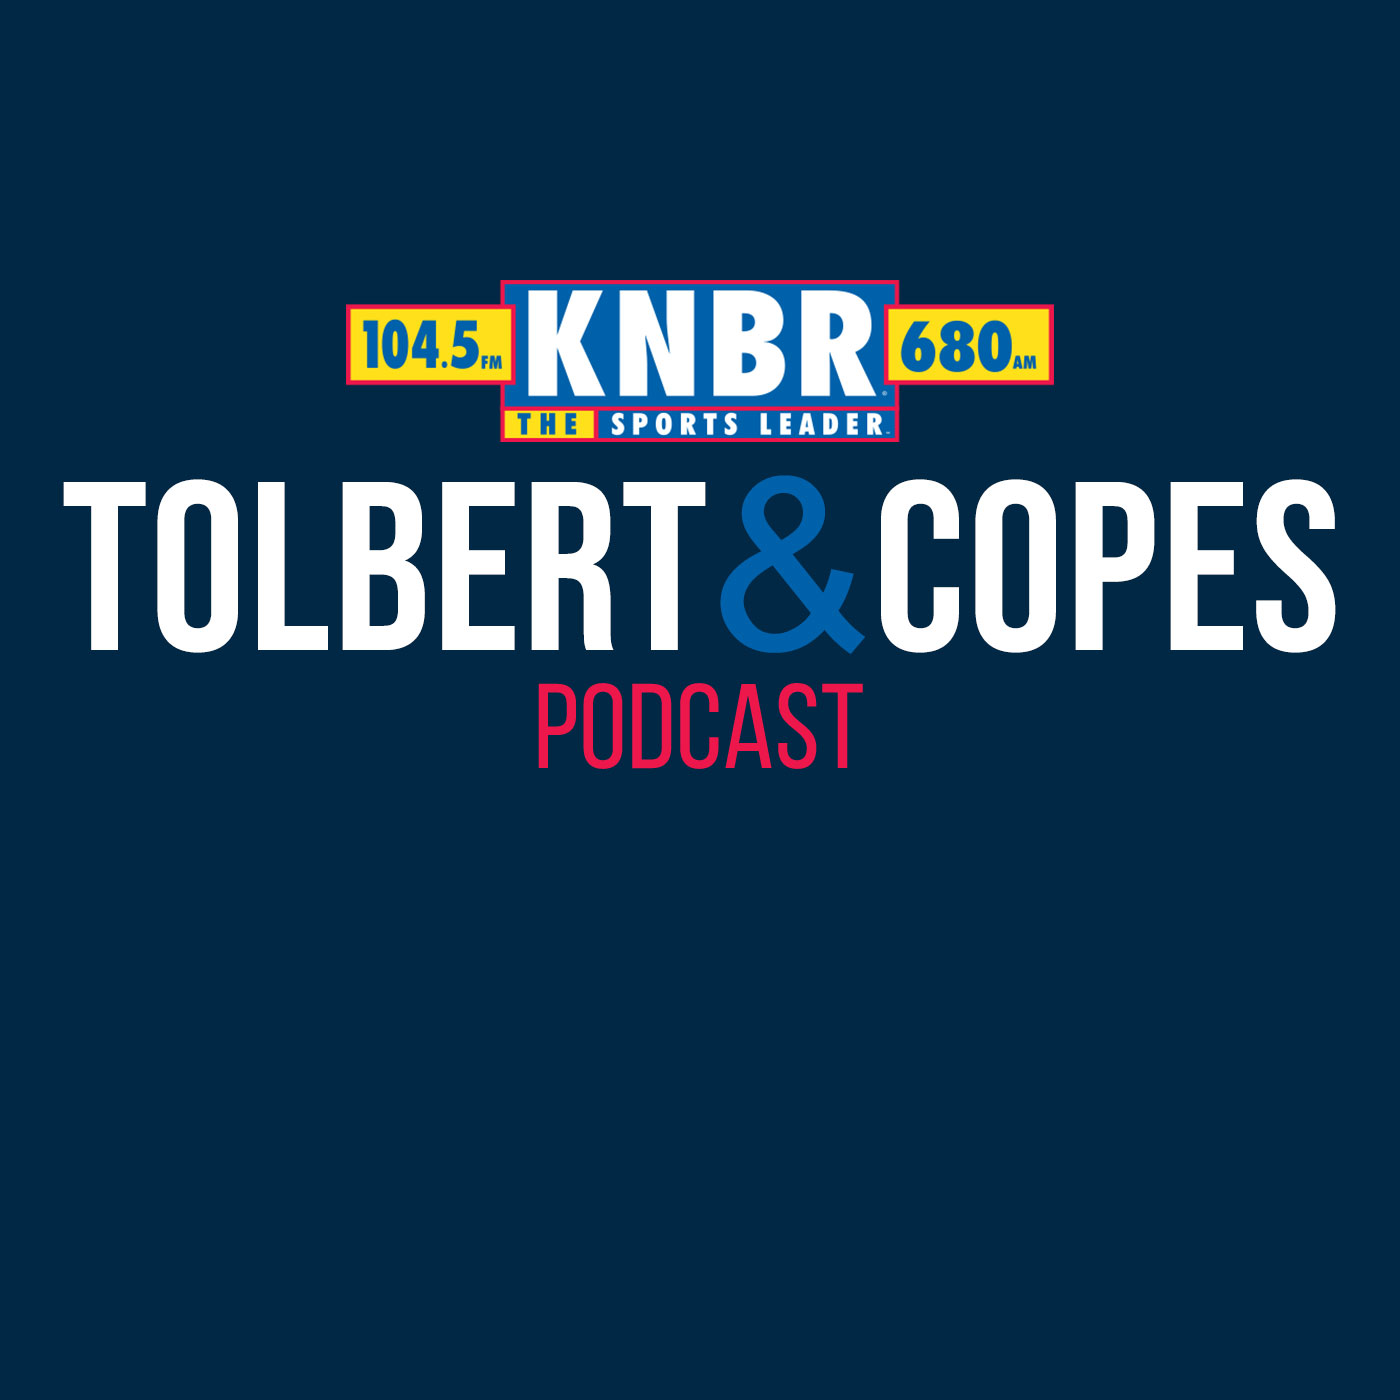 10-17 Matt Maiocco joins Tolbert & Copes to discuss what's the latest with the 49ers injuries